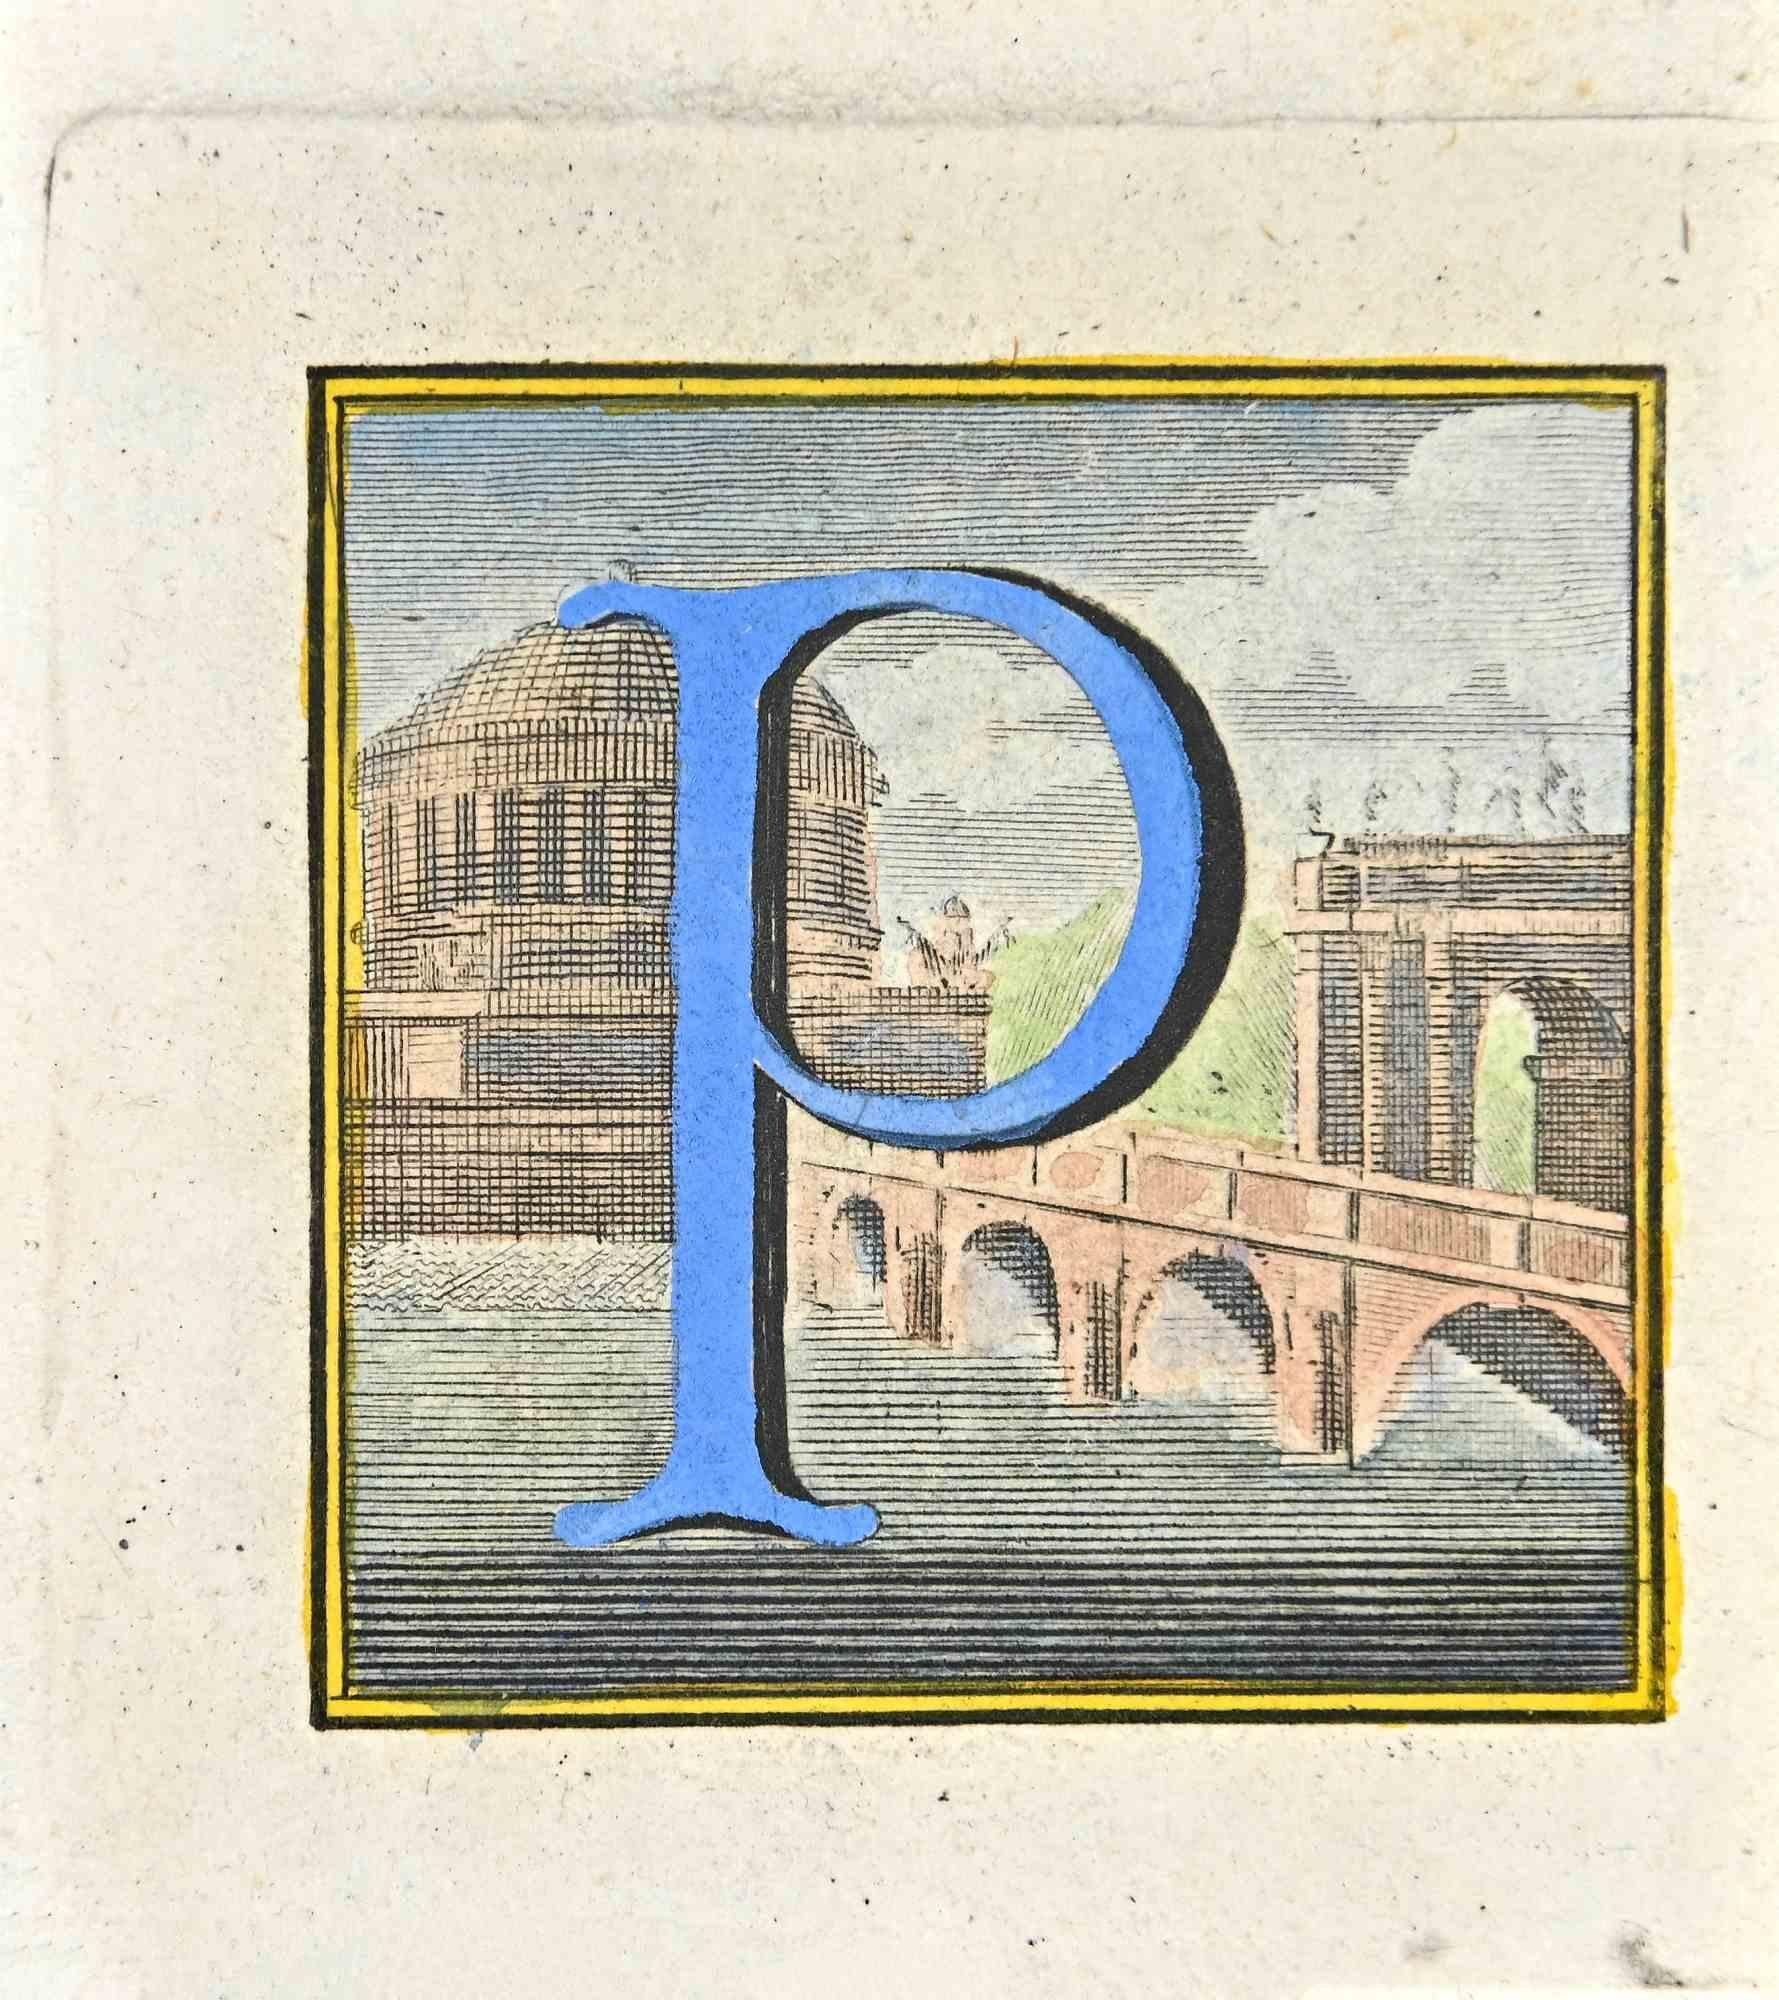 18th letter in the alphabet